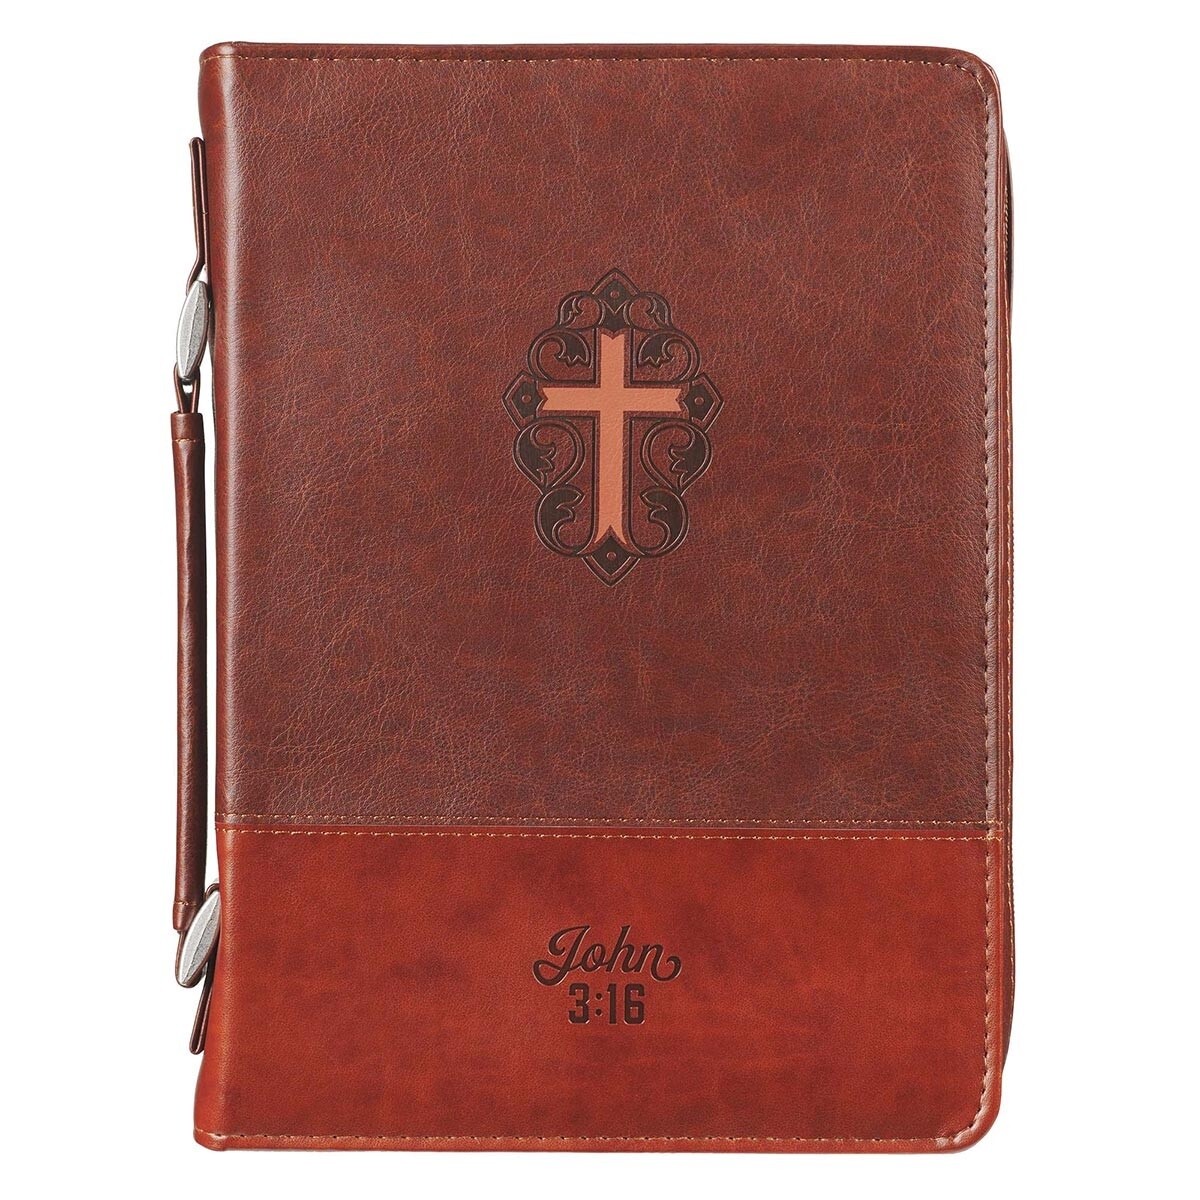 John 3:16 Two-Tone Brown Faux Leather Bible Cover With Cross, Size: Large